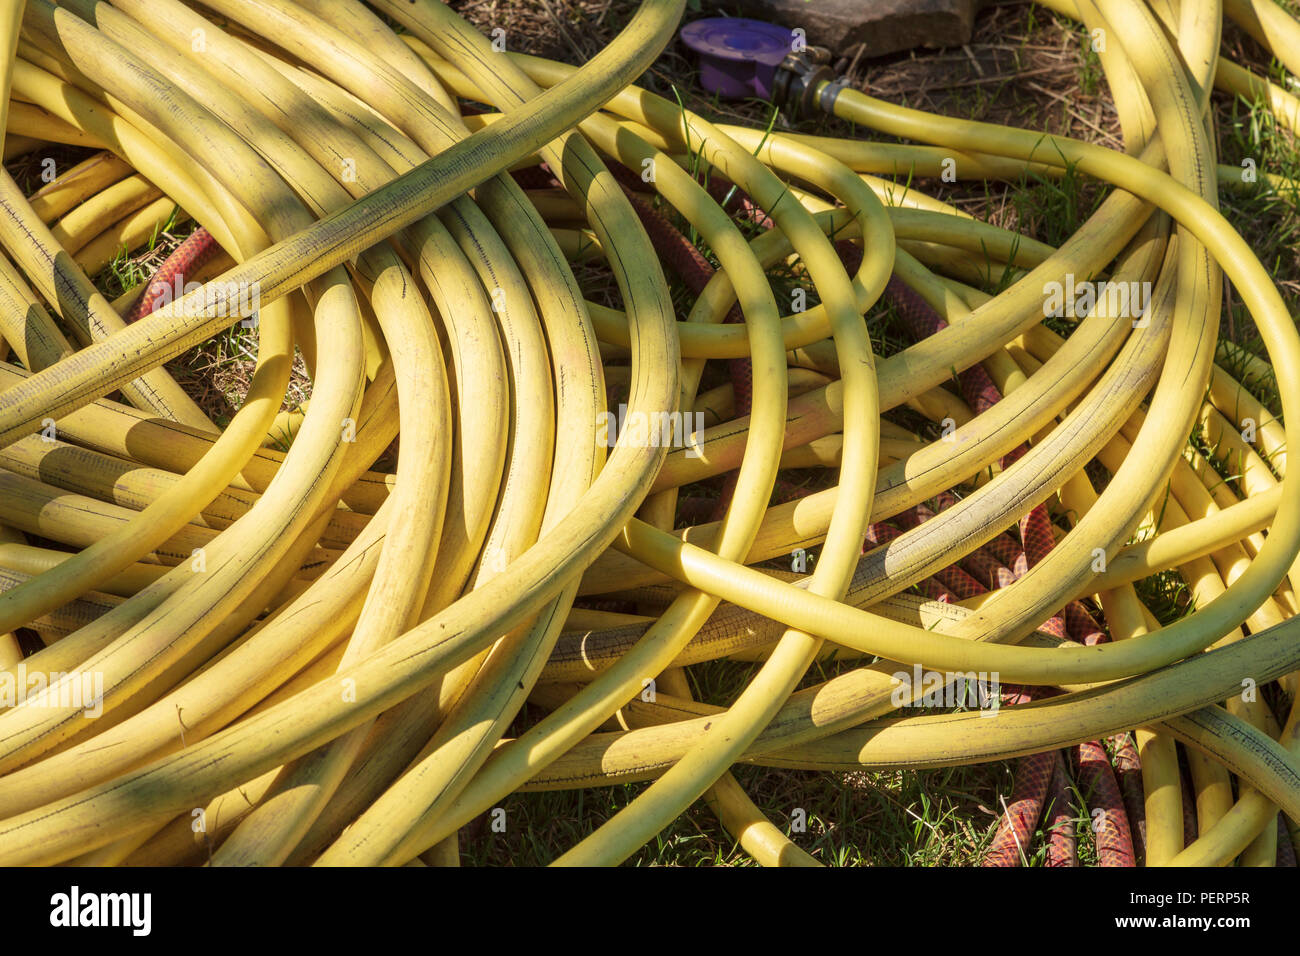 A coiled yellow hosepipe lays on the ground at Great Dixter Gardens, ready to water the historic garden in the hot Summer, Northiam, East Sussex, UK Stock Photo